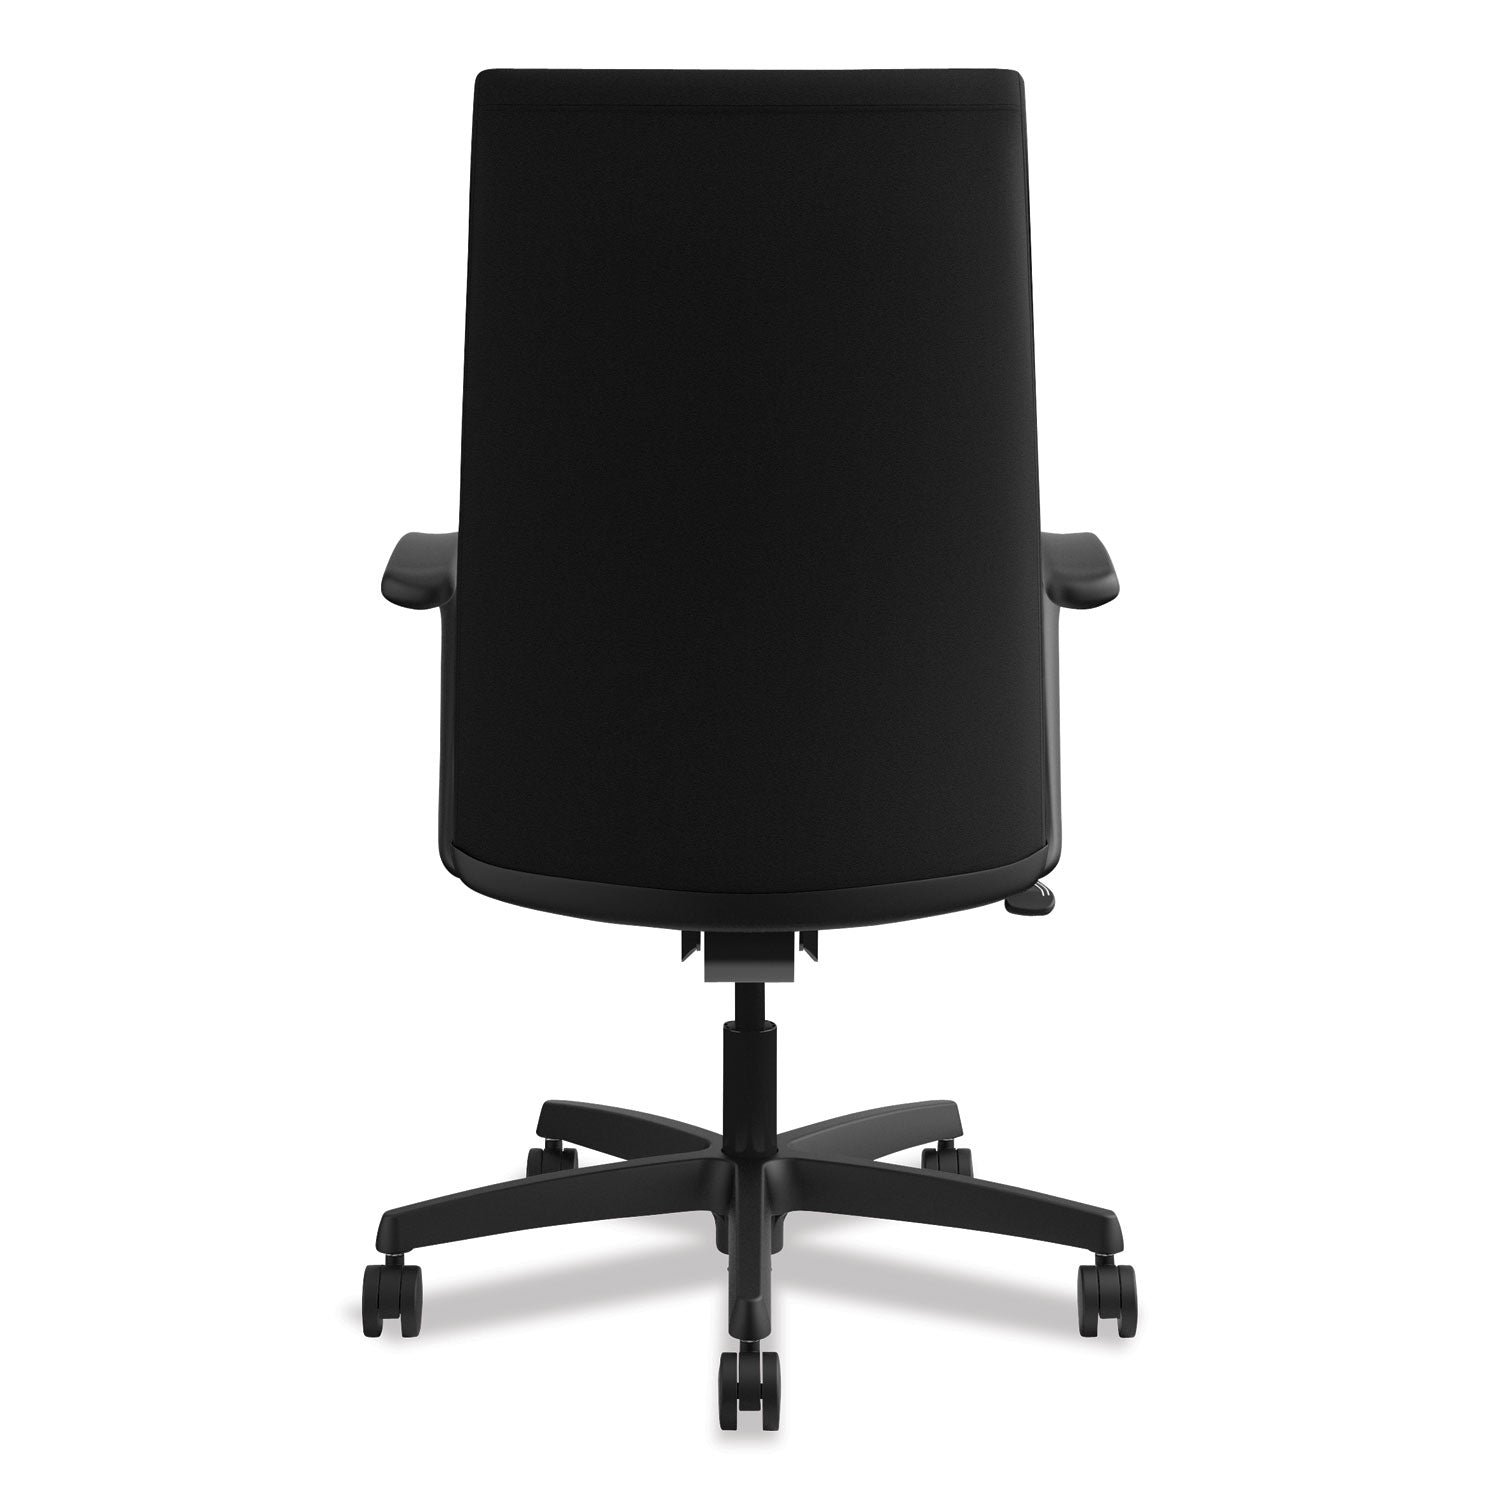 ignition-series-executive-high-back-chair-supports-up-to-300-lb-17-to-21-seat-height-black_honie102cu10 - 7